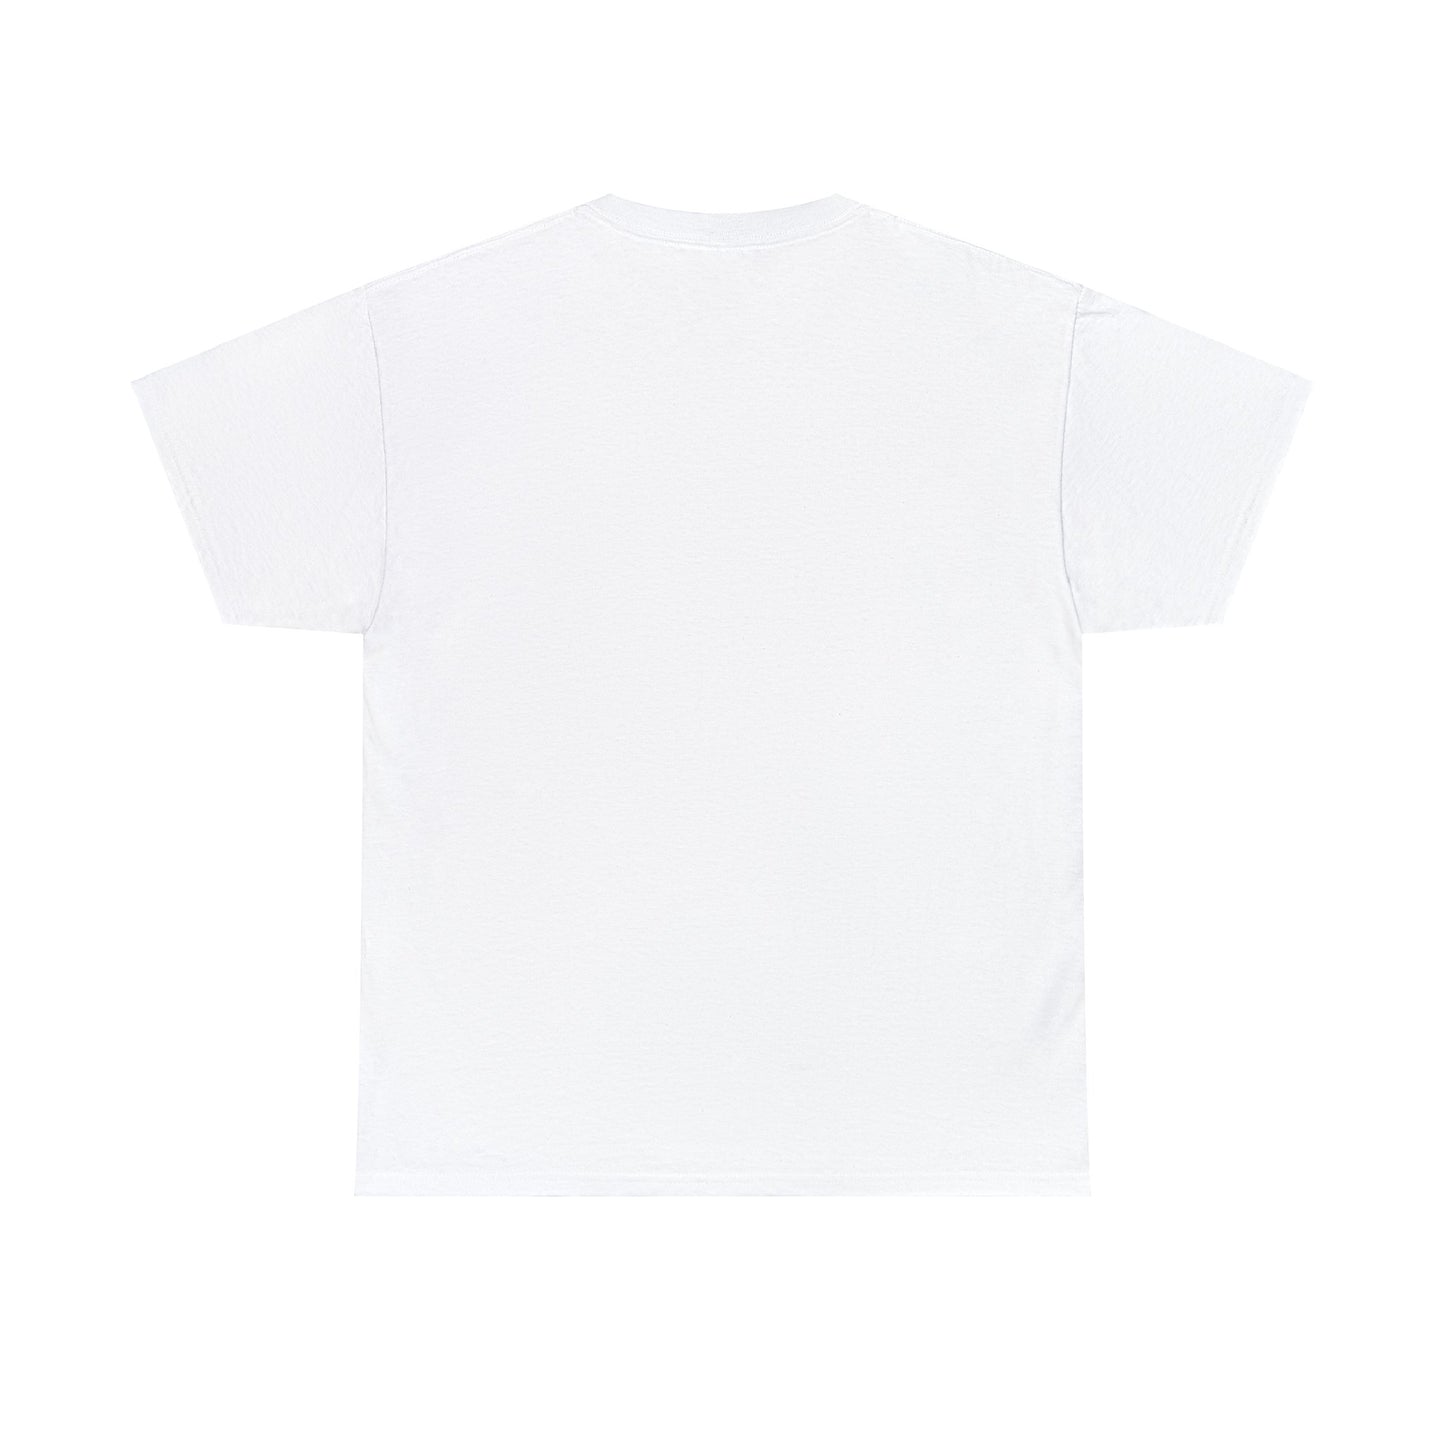 Kemarion Prowell Heavy Cotton Tee